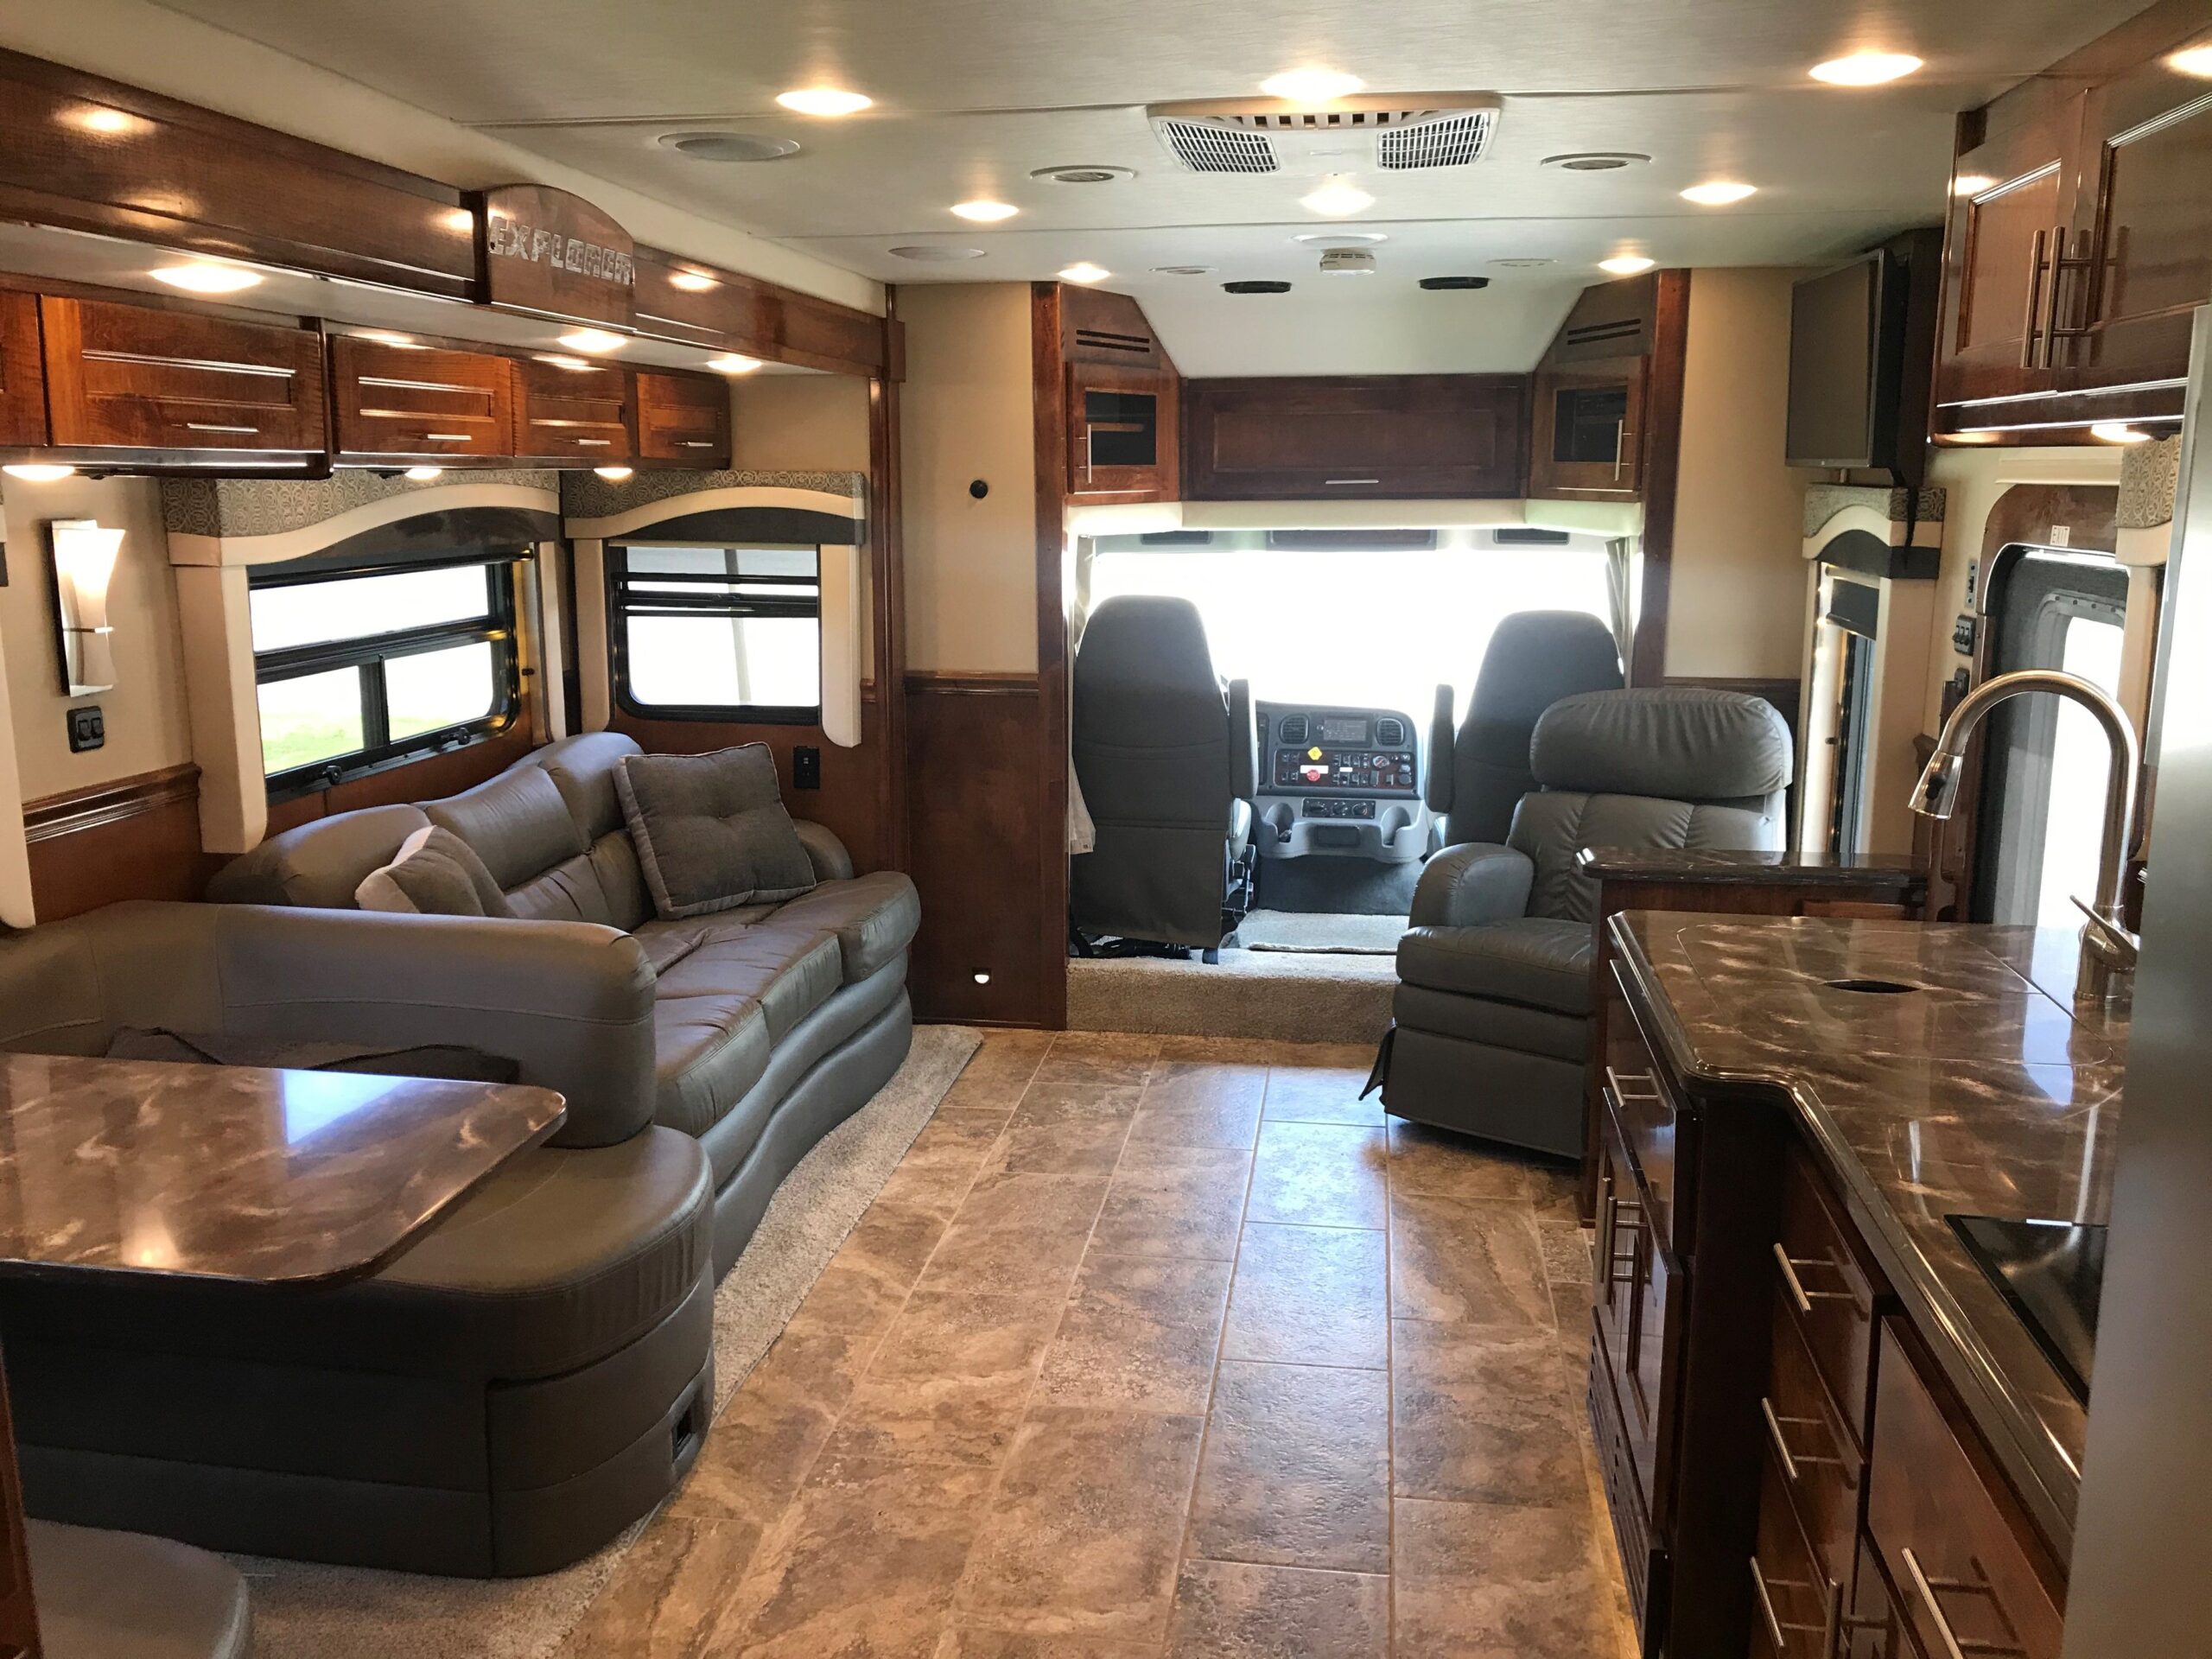 RV Interior - Living Space & Front of Vehicle